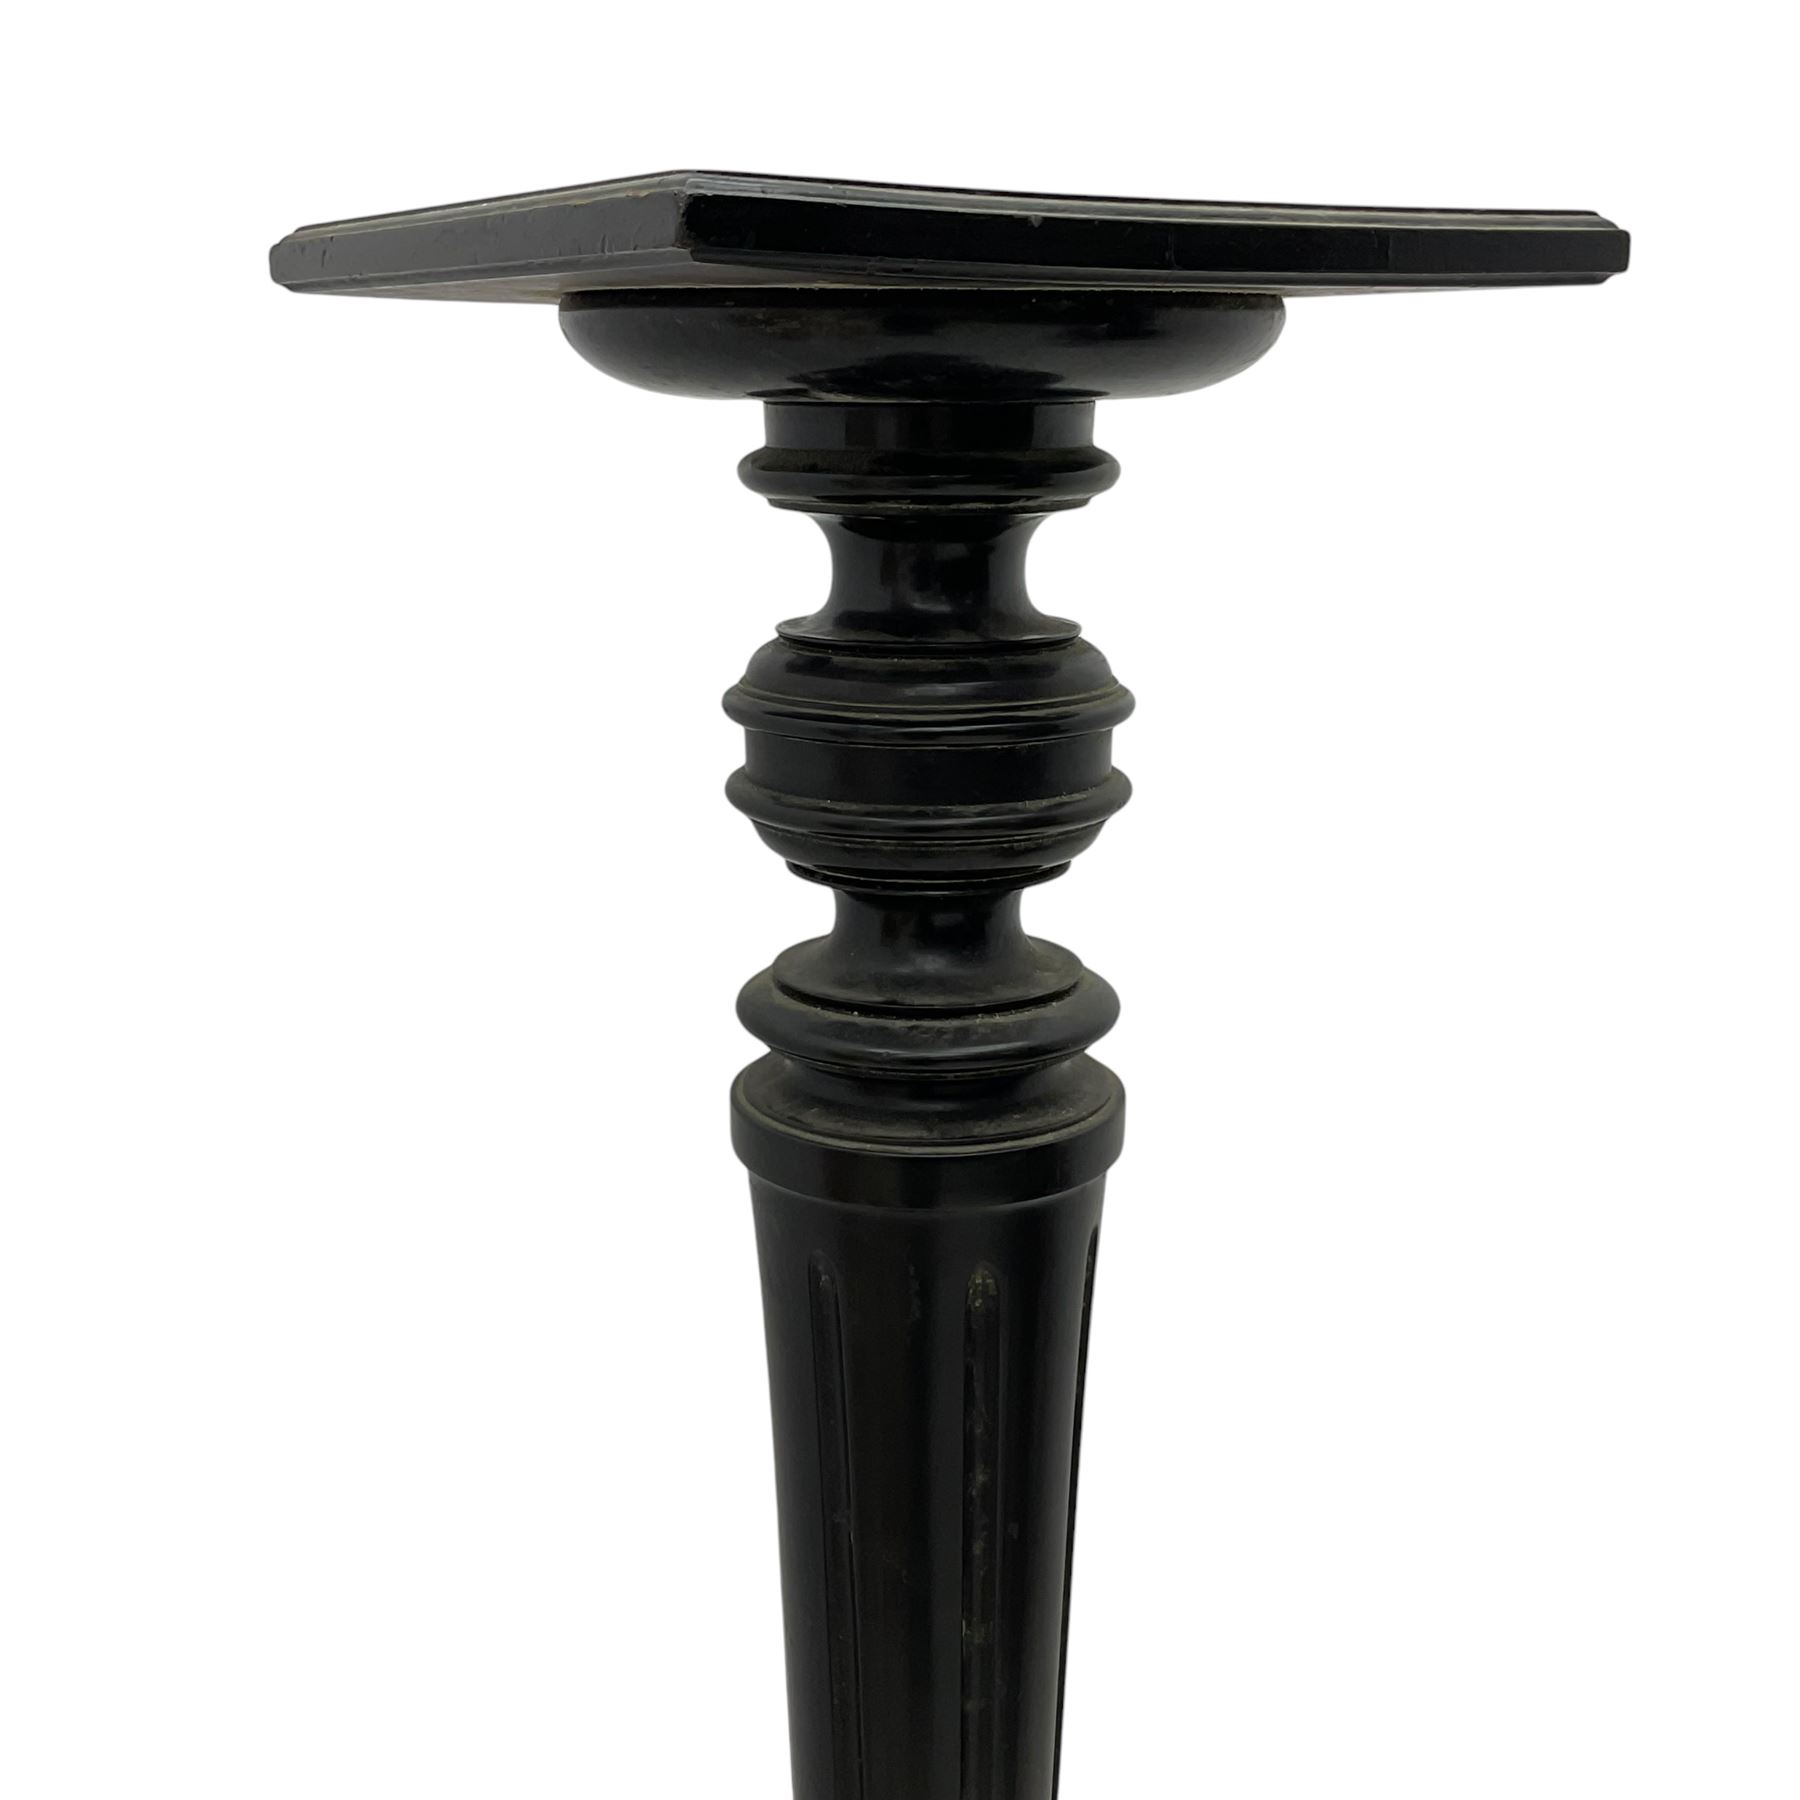 Late Victorian ebonised torchère or plant stand - Image 3 of 5